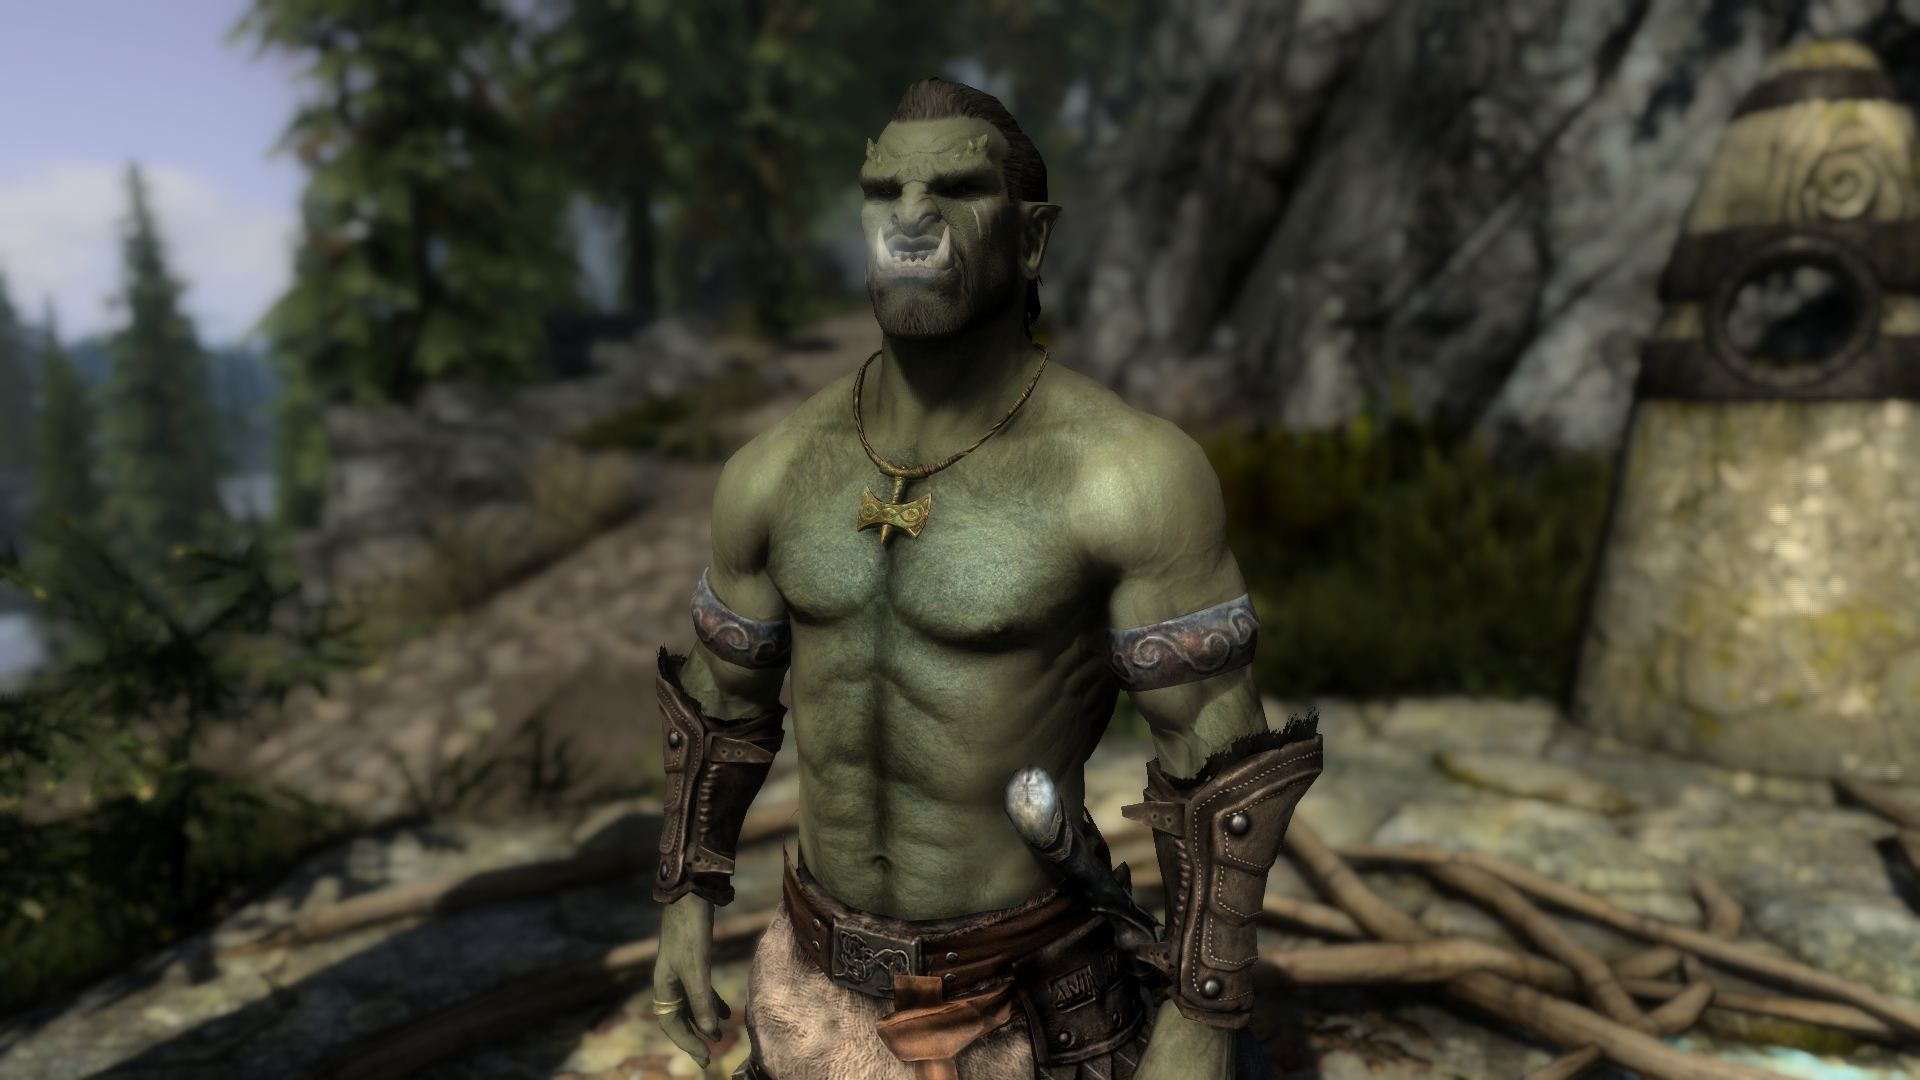 Orc character in Skyrim stood by the standing stones